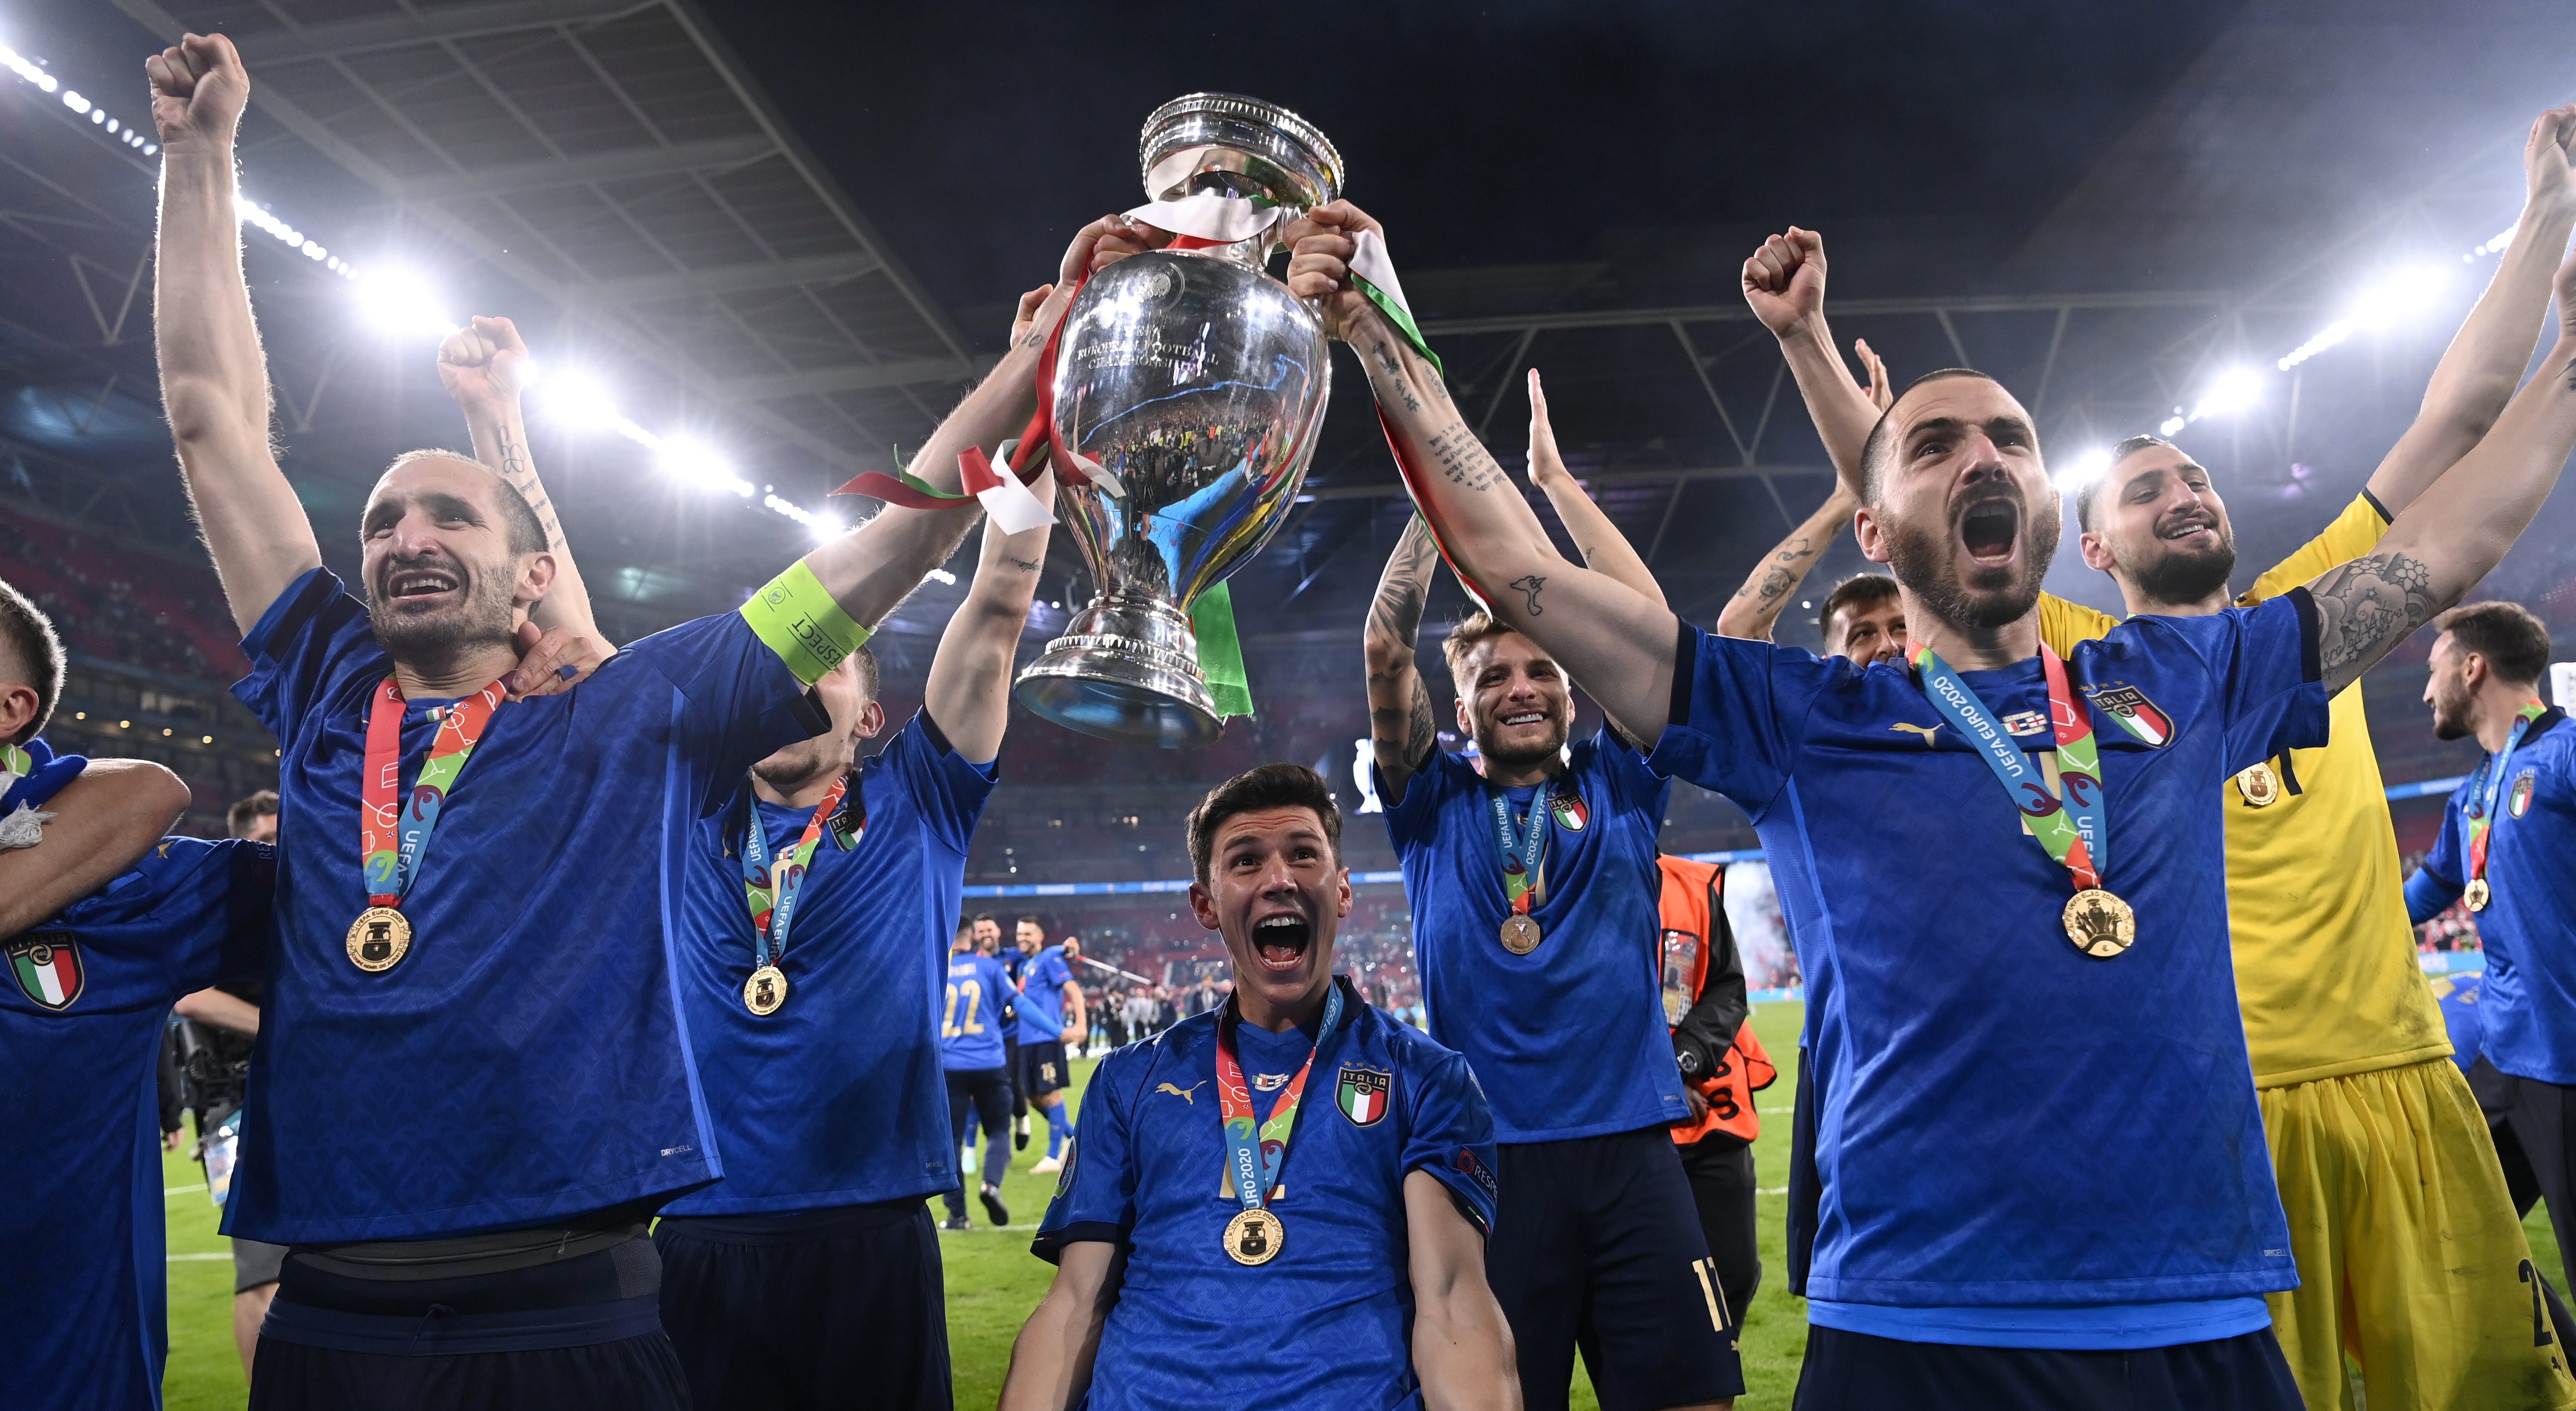 Italy celebrate winning the Euro 2020 final (PA Wire)